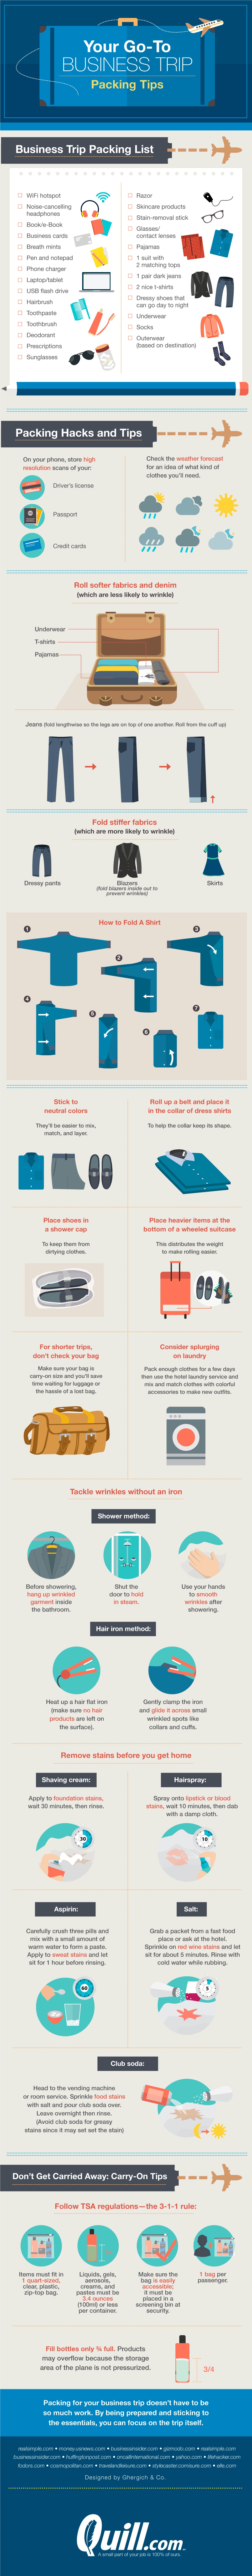 business-trip-packing-tips-infographic.jpg